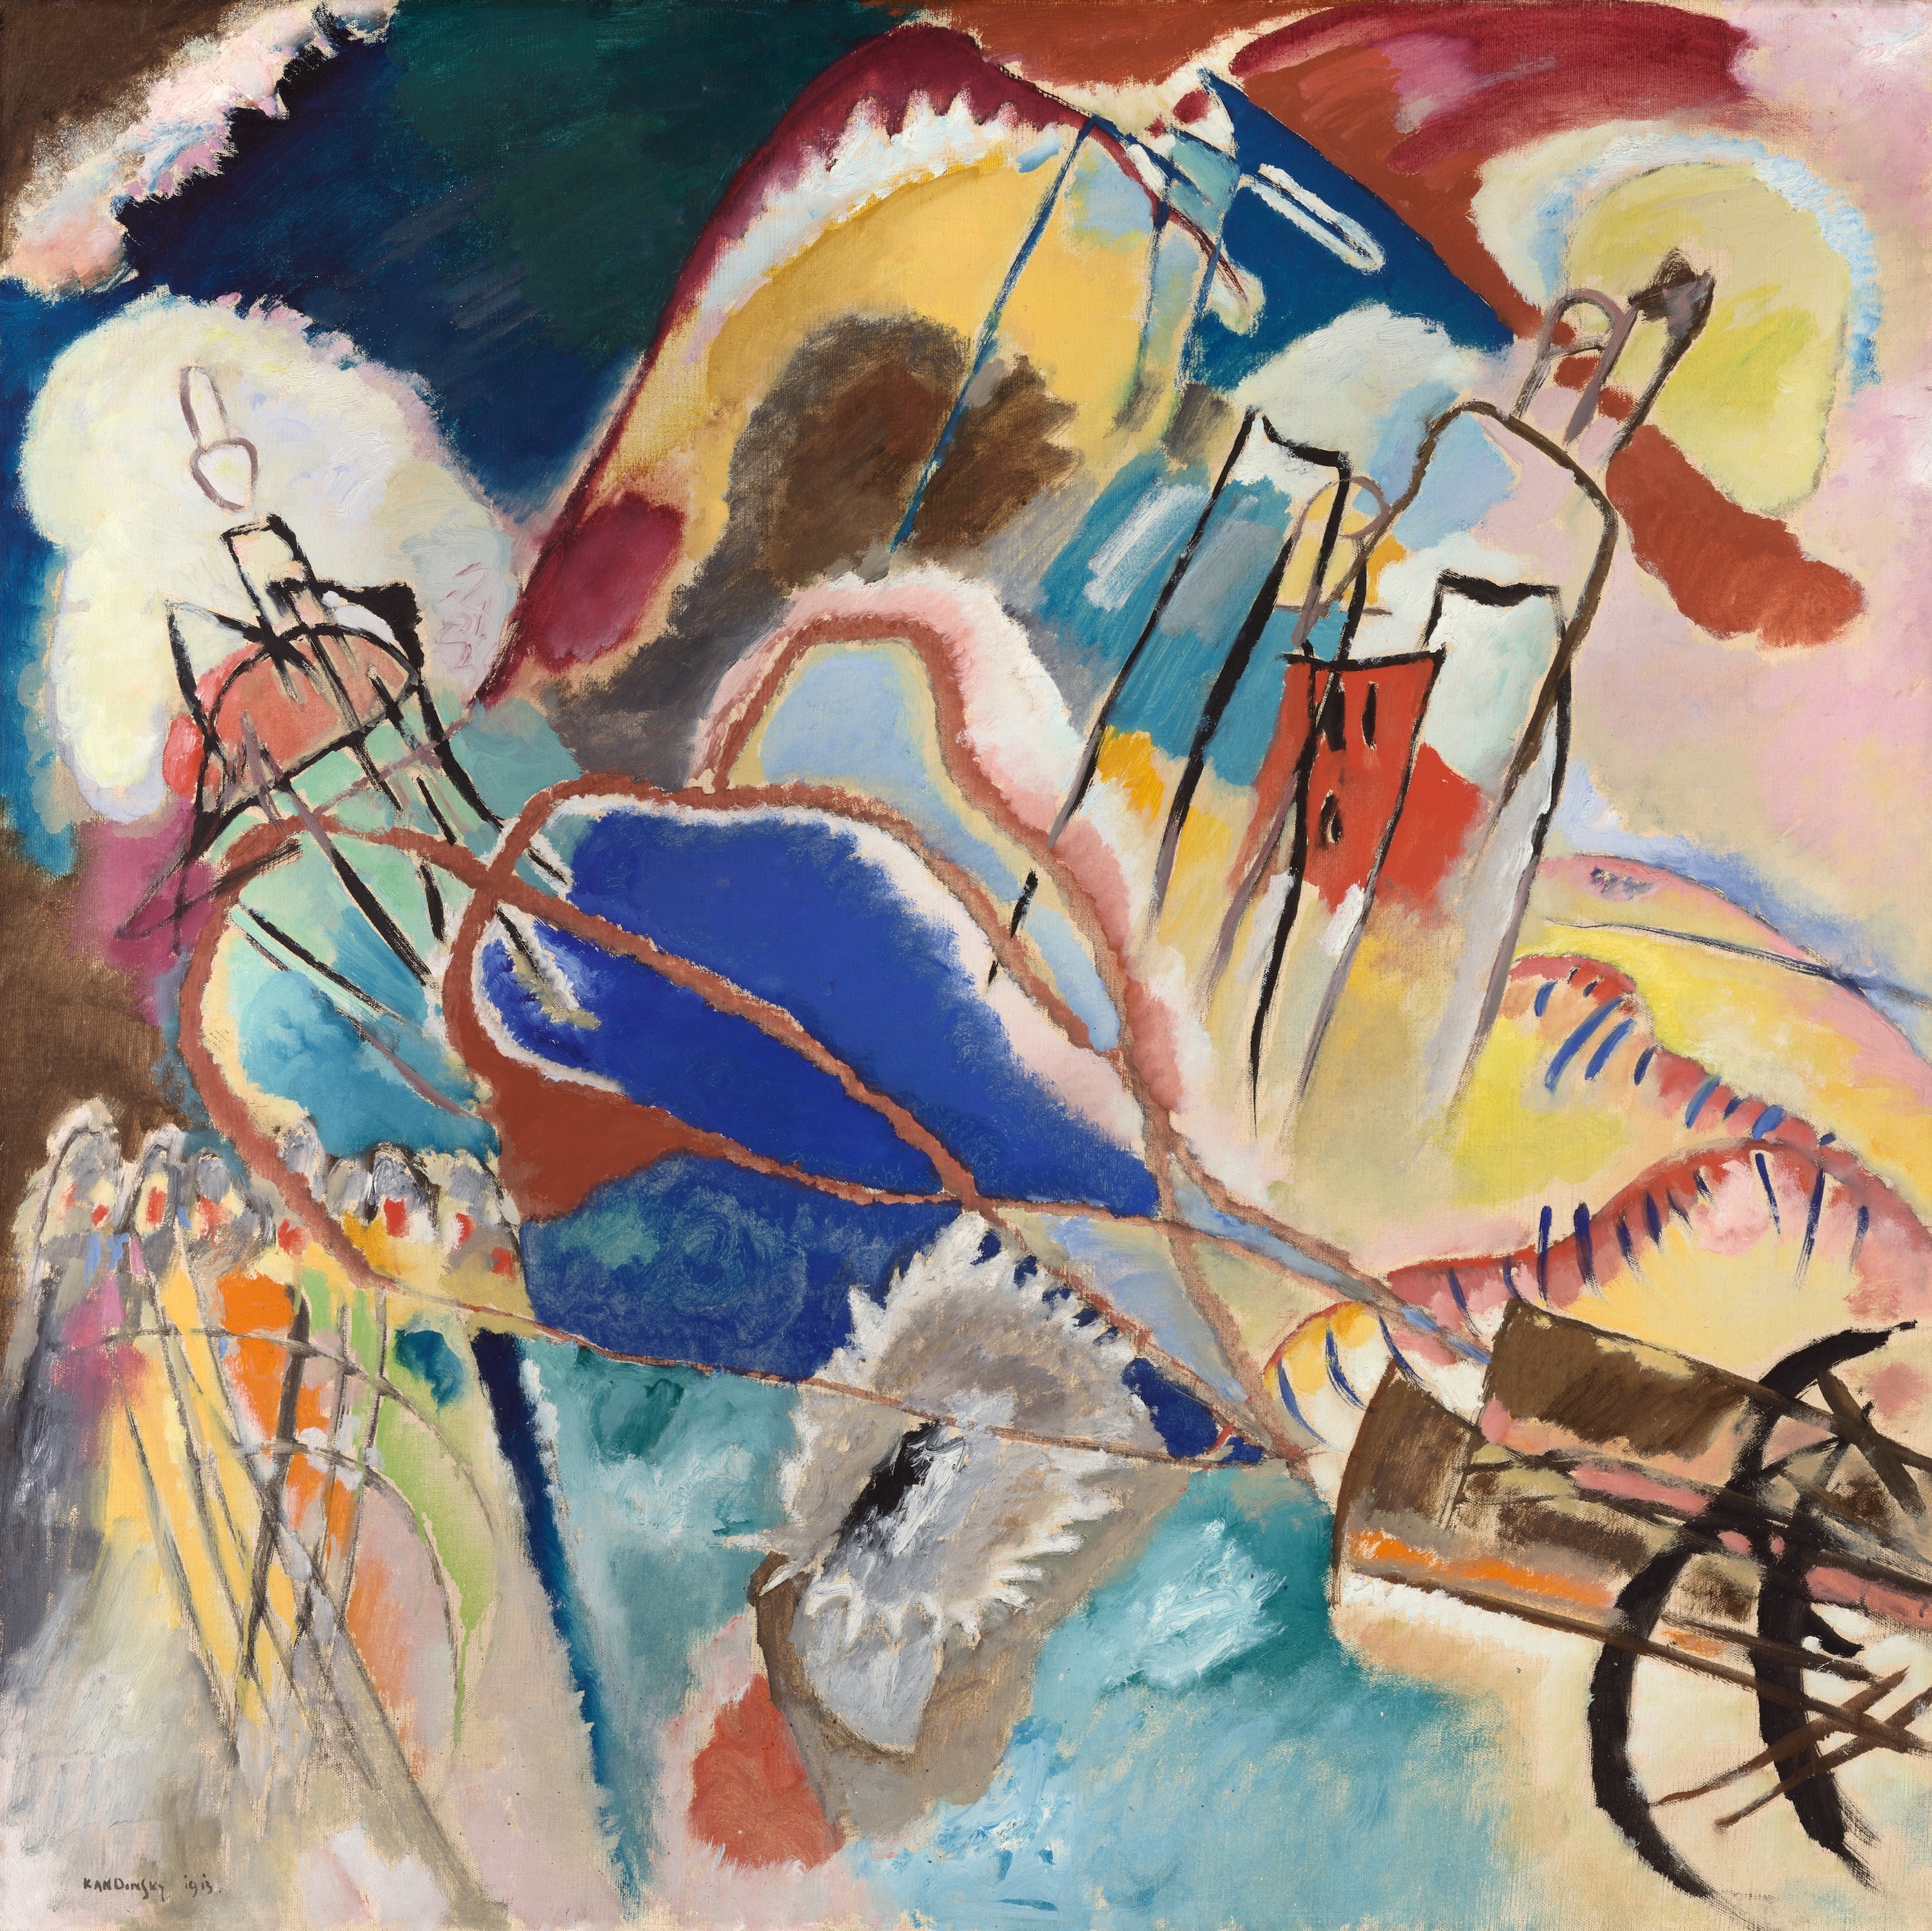 Improvisation No. 30 (Cannons) by Wassily Kandinsky - 1913 - 111 × 111.3 cm Art Institute of Chicago